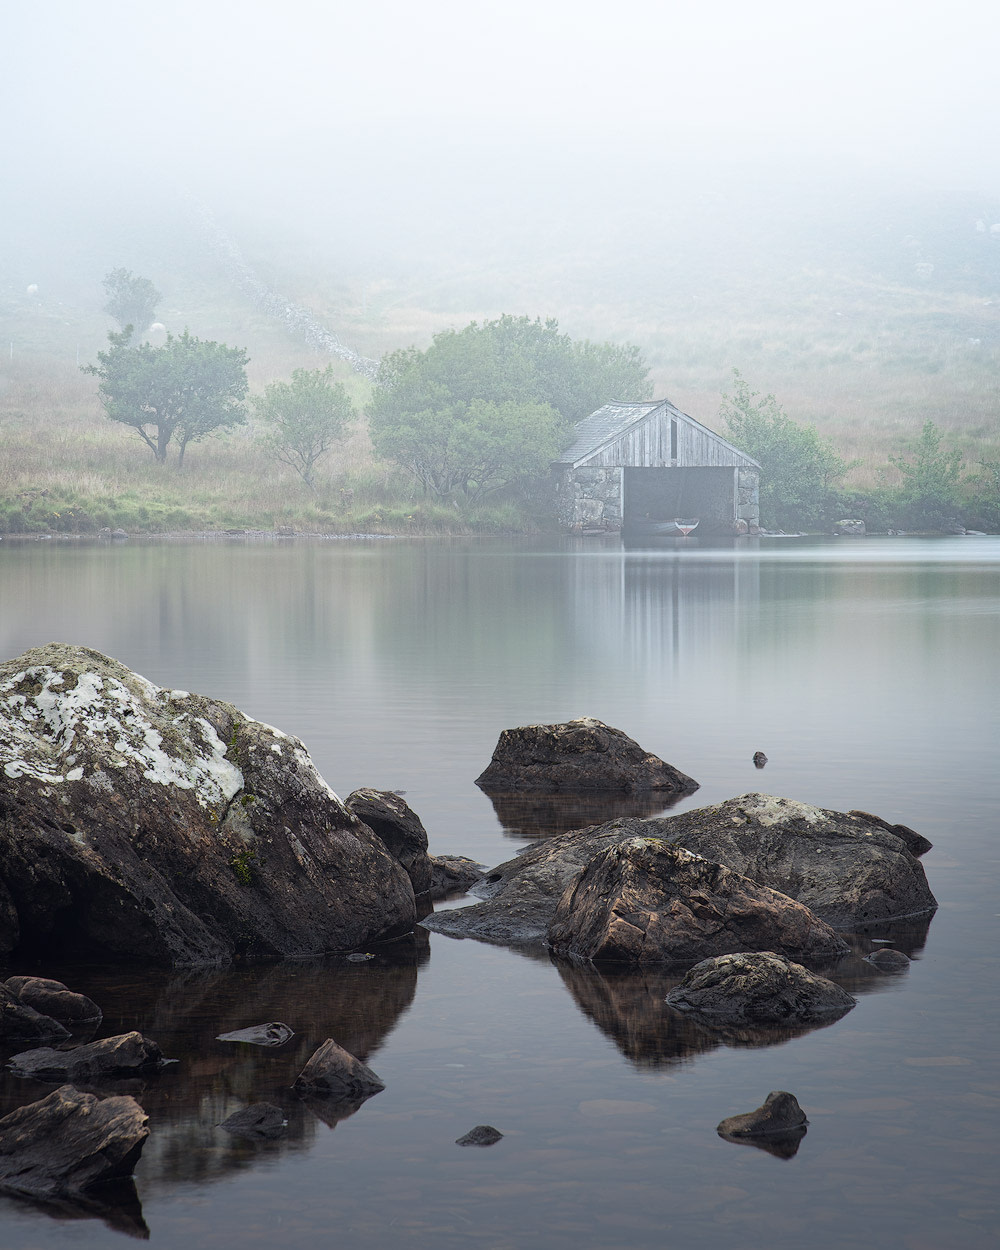 Foggy conditions around the boat house at Cregennan Lakes